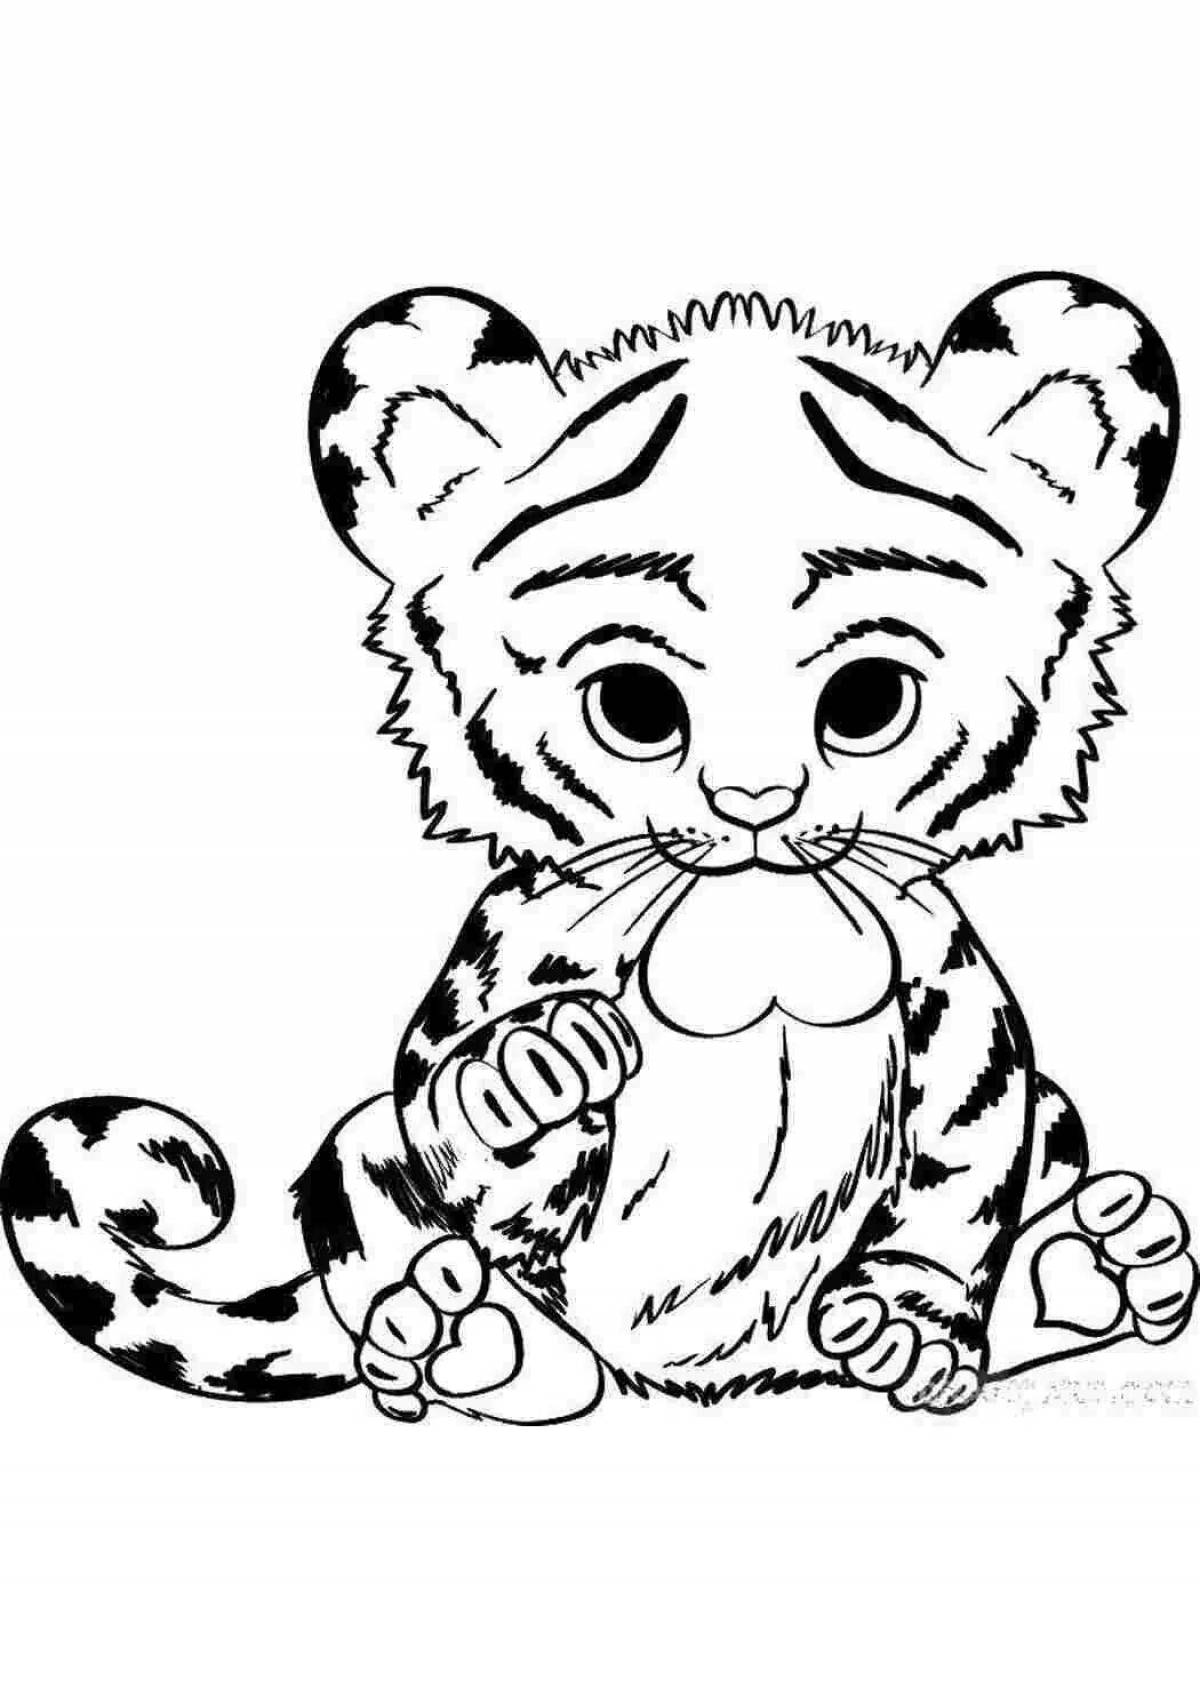 Tiger cub bright coloring for girls